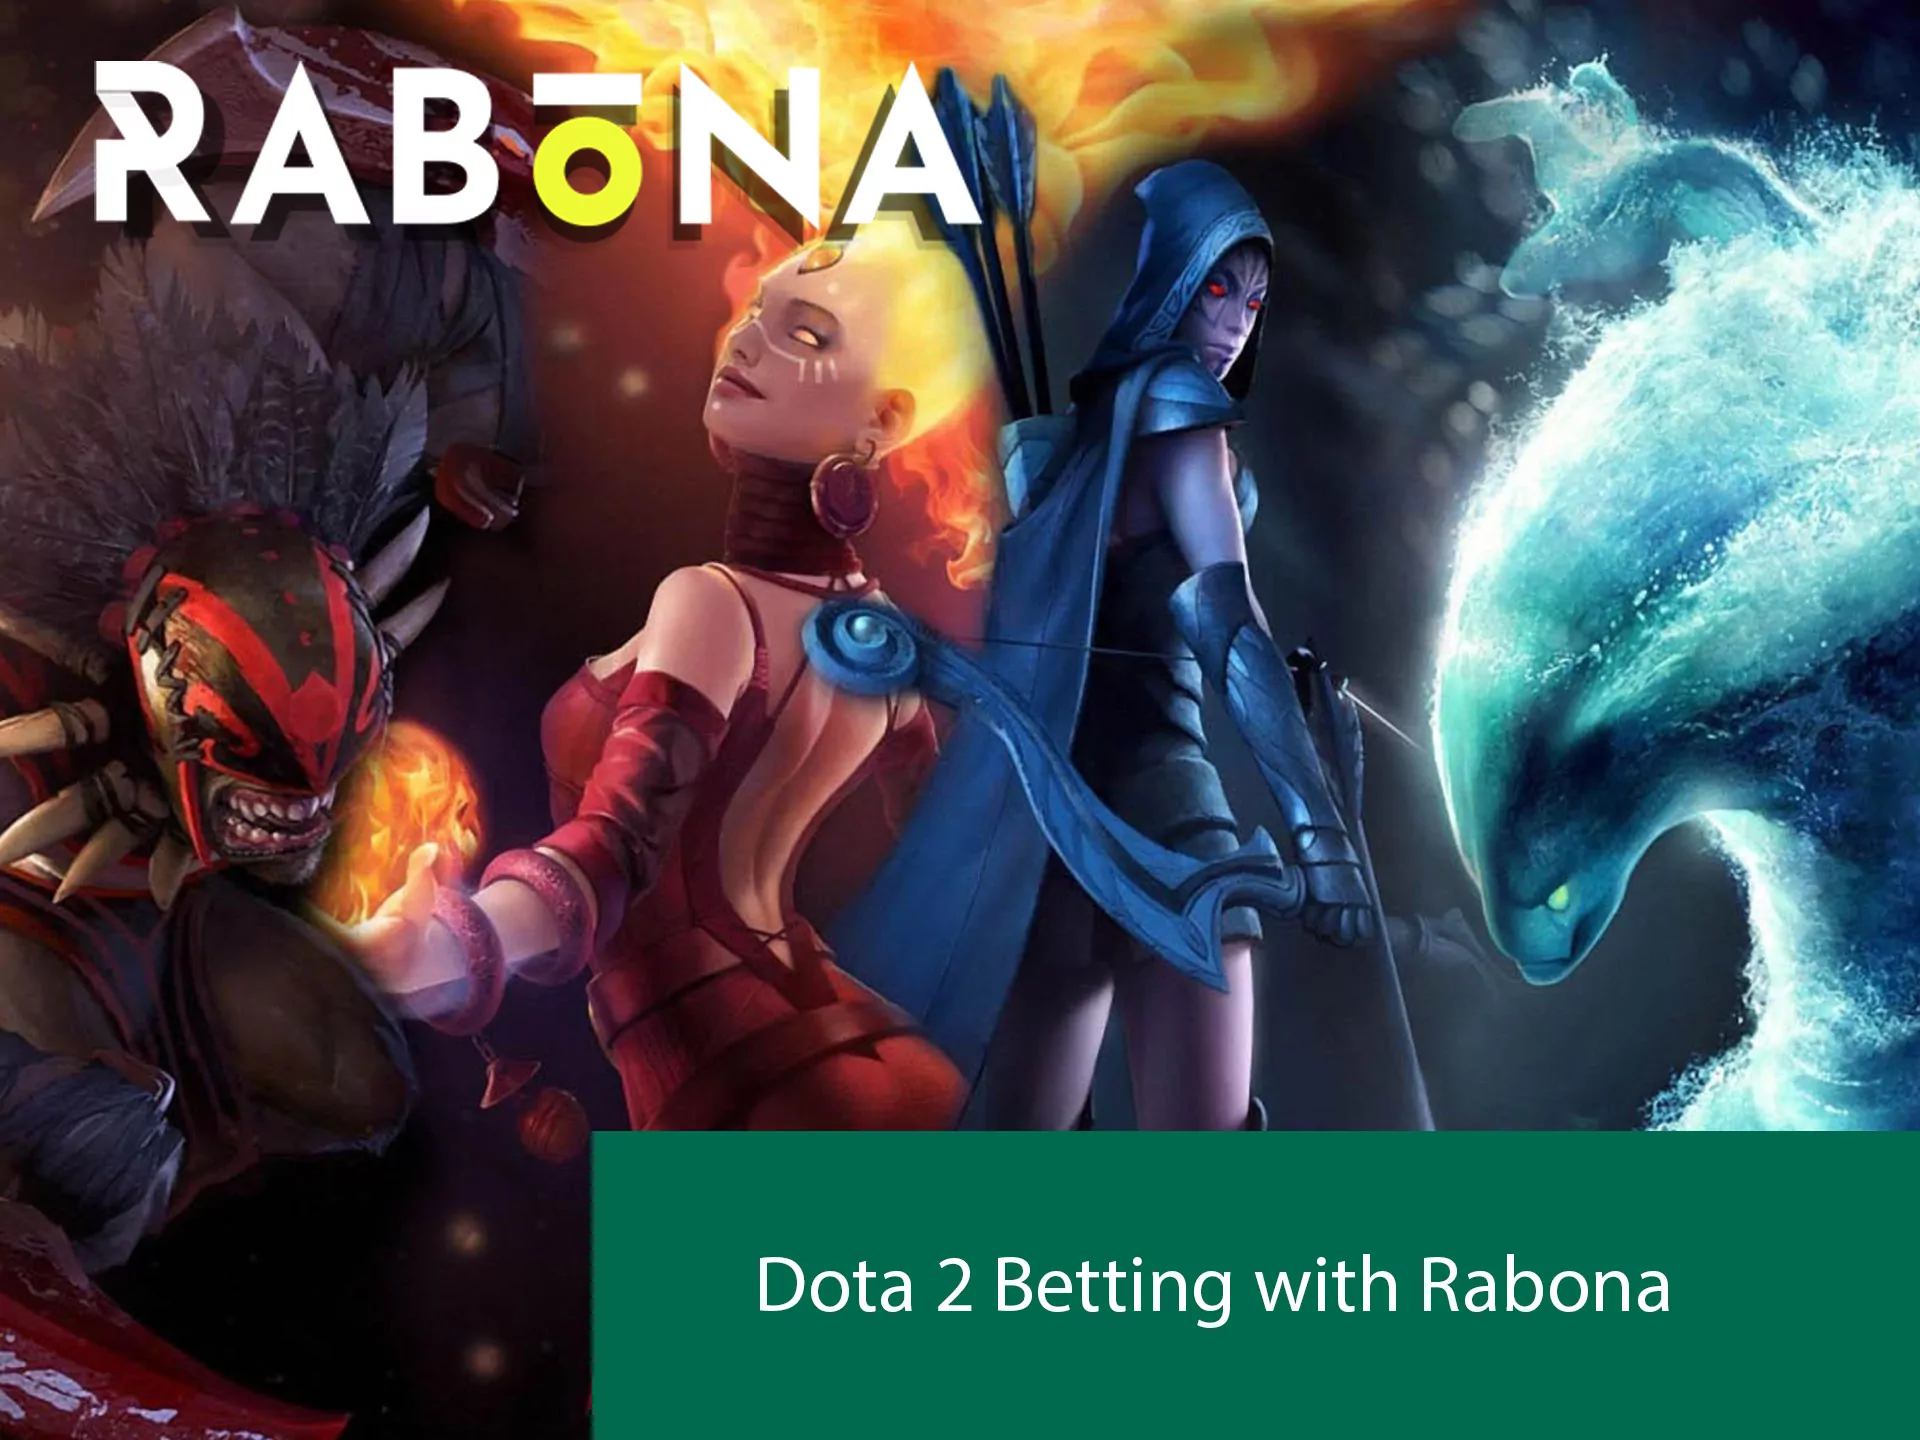 Rabna include more than 5 types of bets for each event.